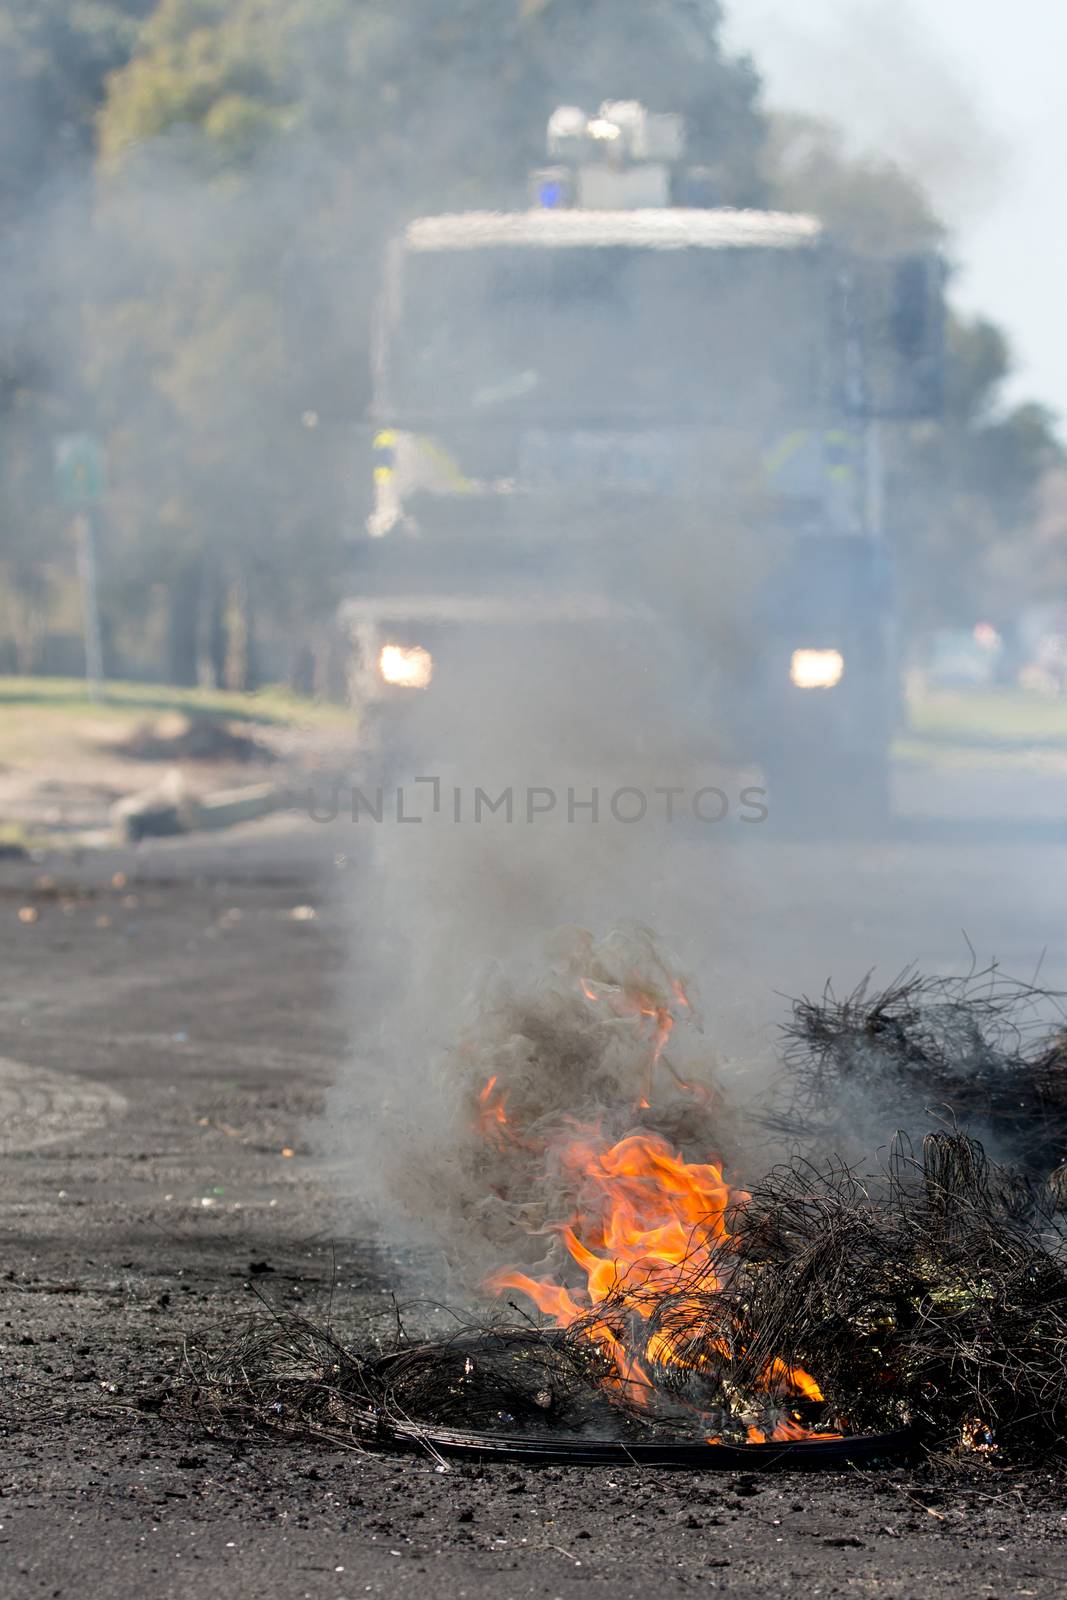 Burning rubber tyres in the streets in South Africa with police riot vehicle in the backround